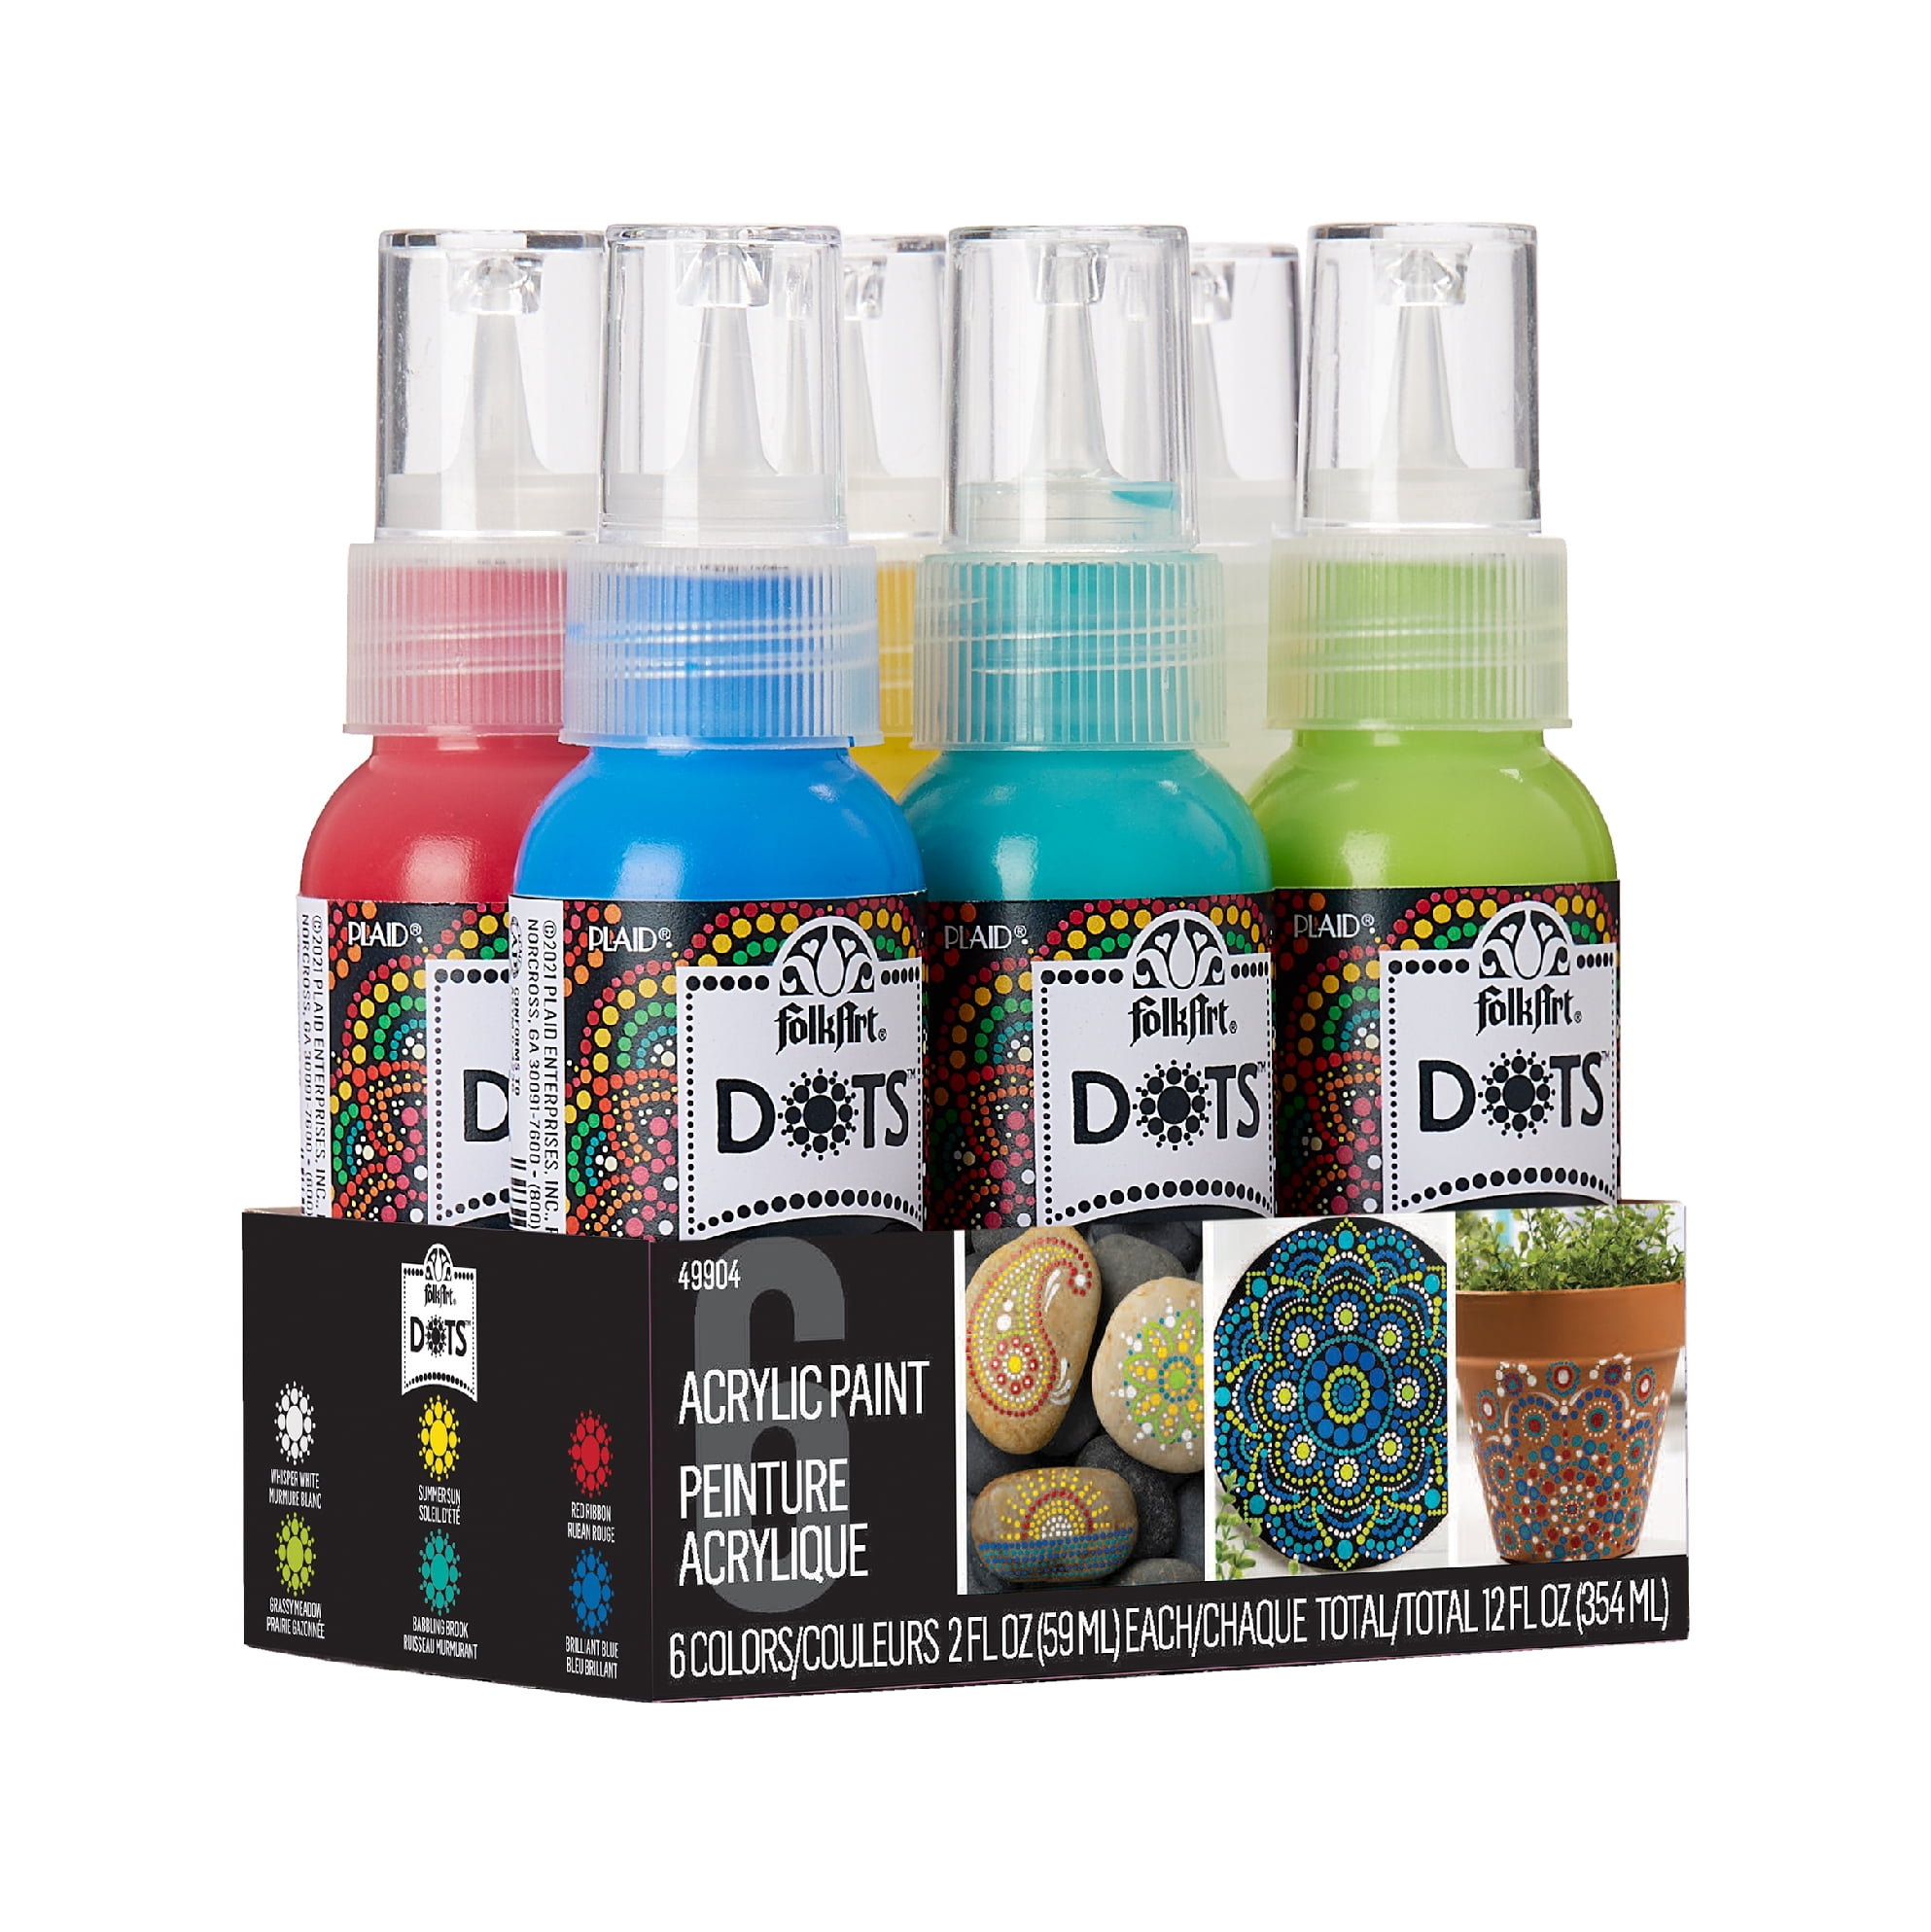 Gunsamg Art Acrylic Paint Markers, 72 Color, for Rock, Glass, Wood, Canvas,  Stone, Great Gift Idea for Kids, Adult